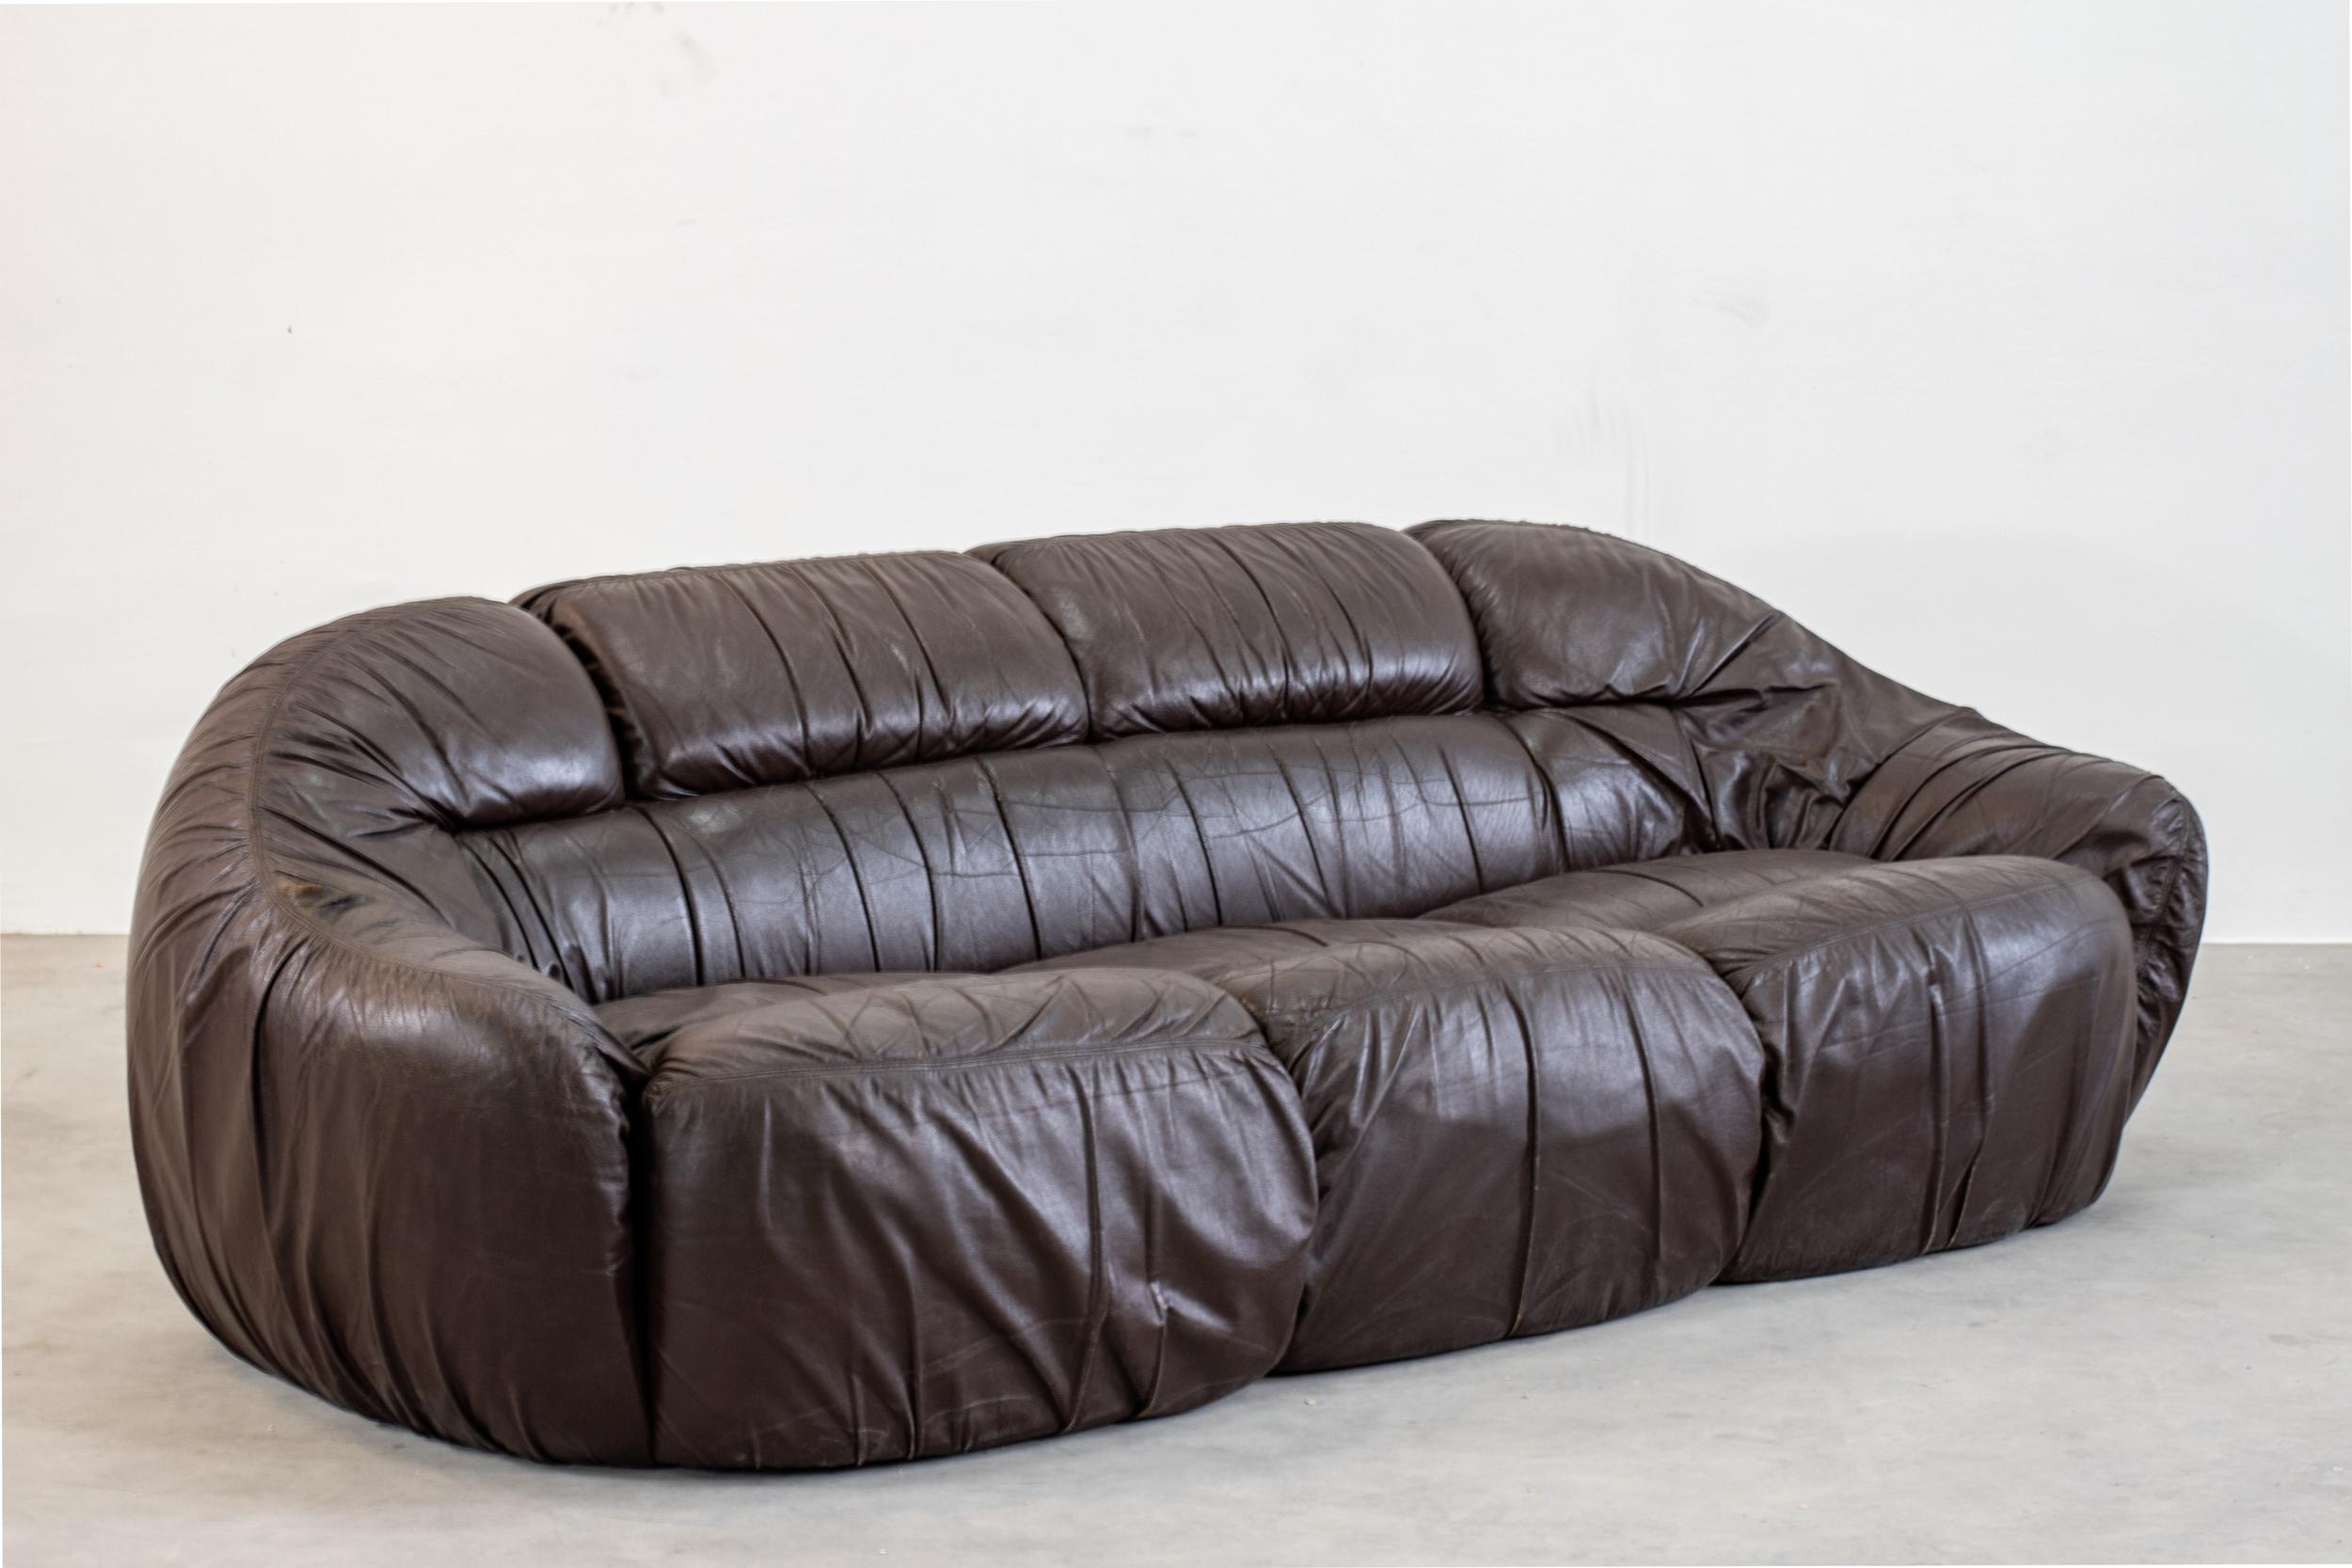 Otaria sofa in ABS, polyurethane foam, and padded leather, designed by Sergio Crippa for Neoflex, 1970s, Italy.

 